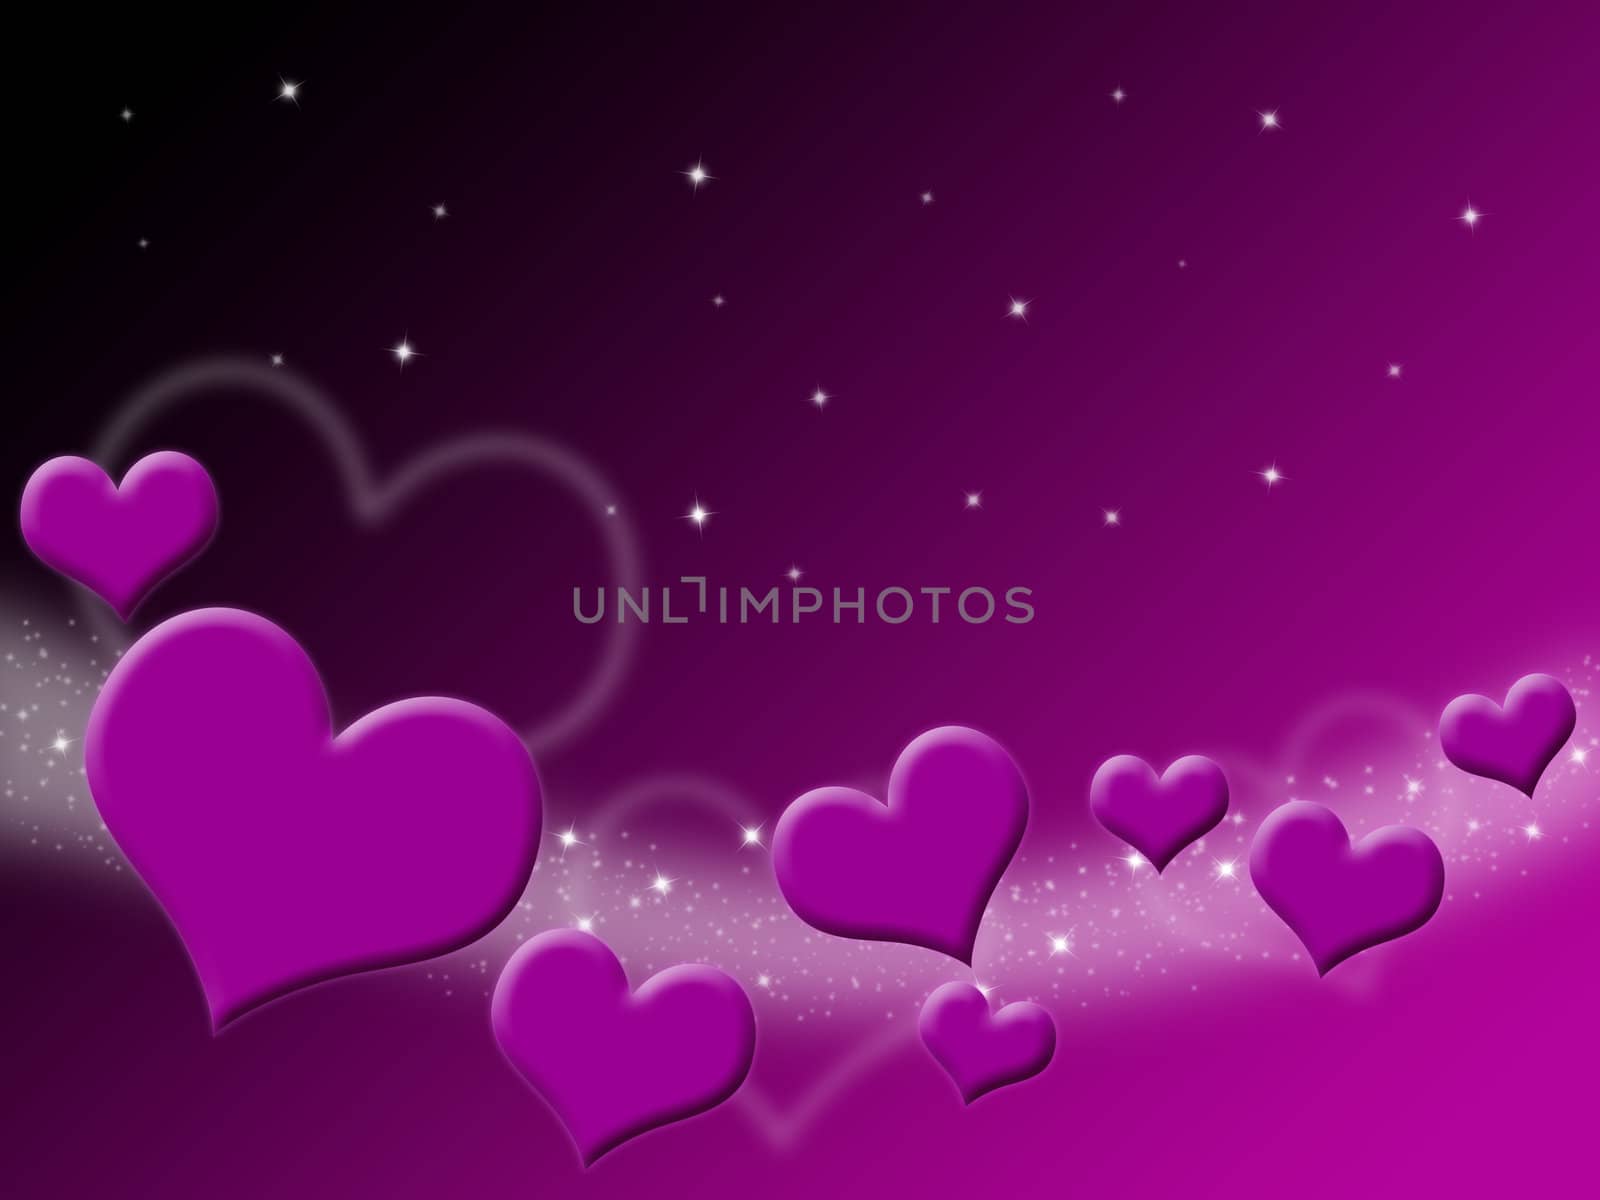 Valentines Day Card with purple Hearts and stars on starry background
